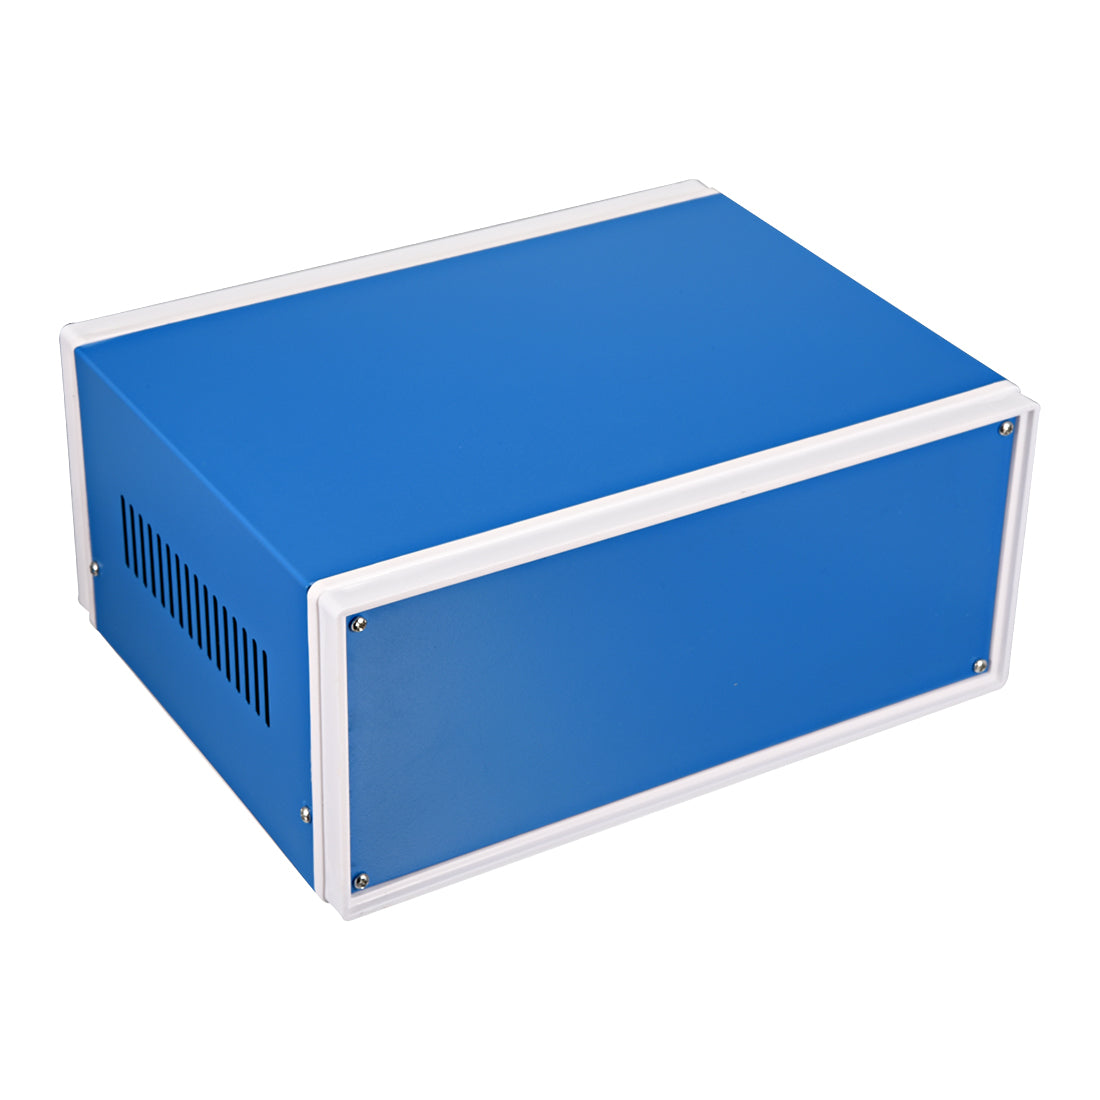 uxcell Uxcell Metal Blue Project Junction Box Enclosure Case 250 x 190 x 110mm/9.84 x 7.48 x 4.33inch